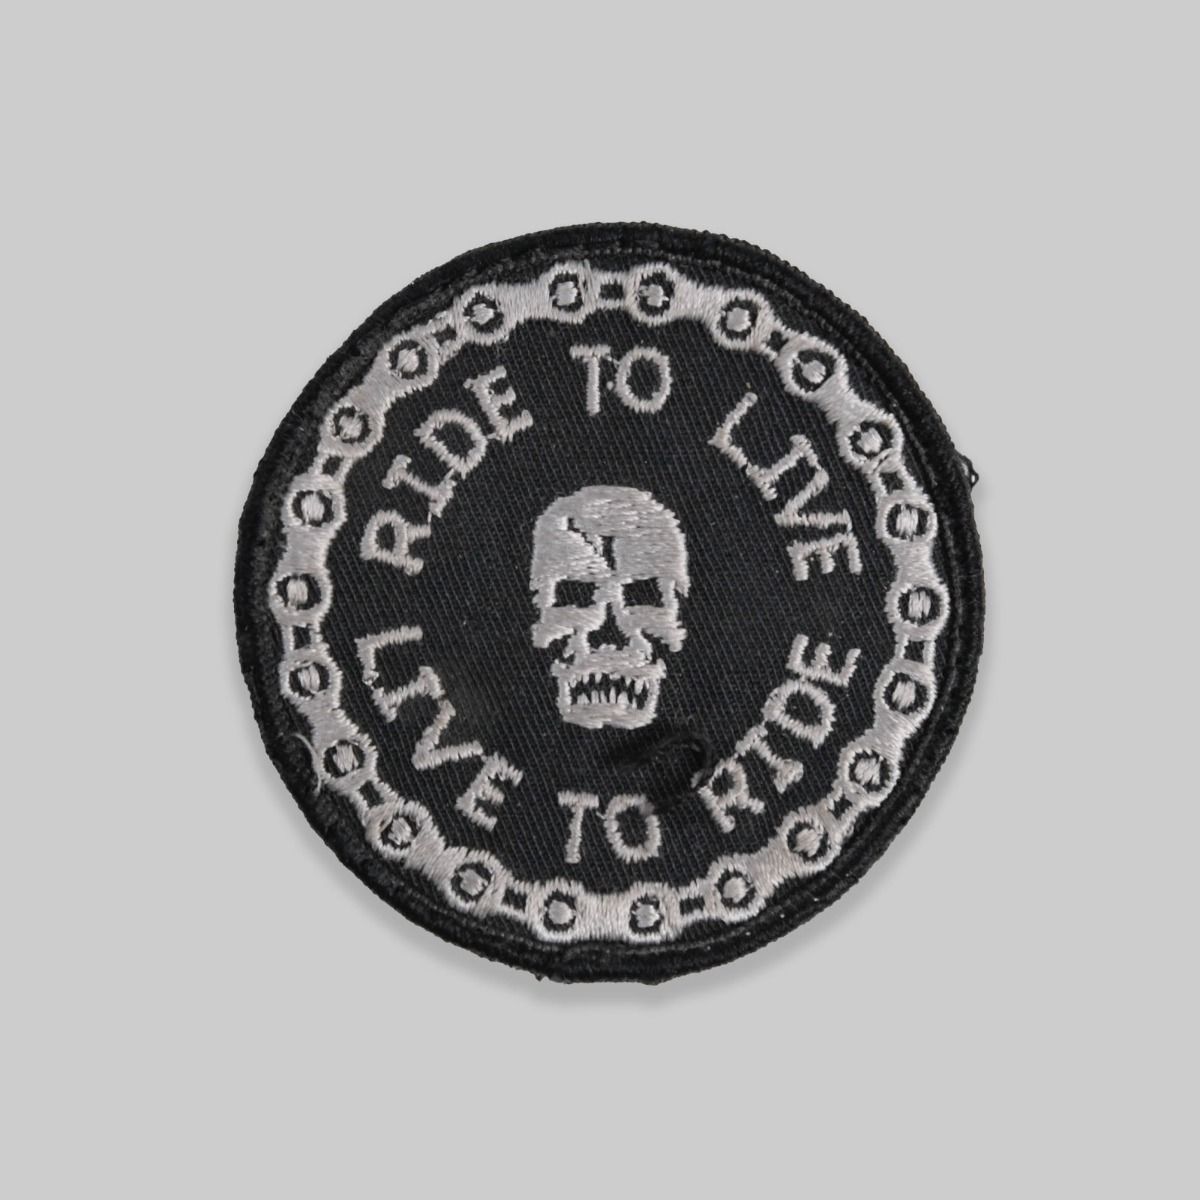 Ride To Live, Live To Ride Biker Patch